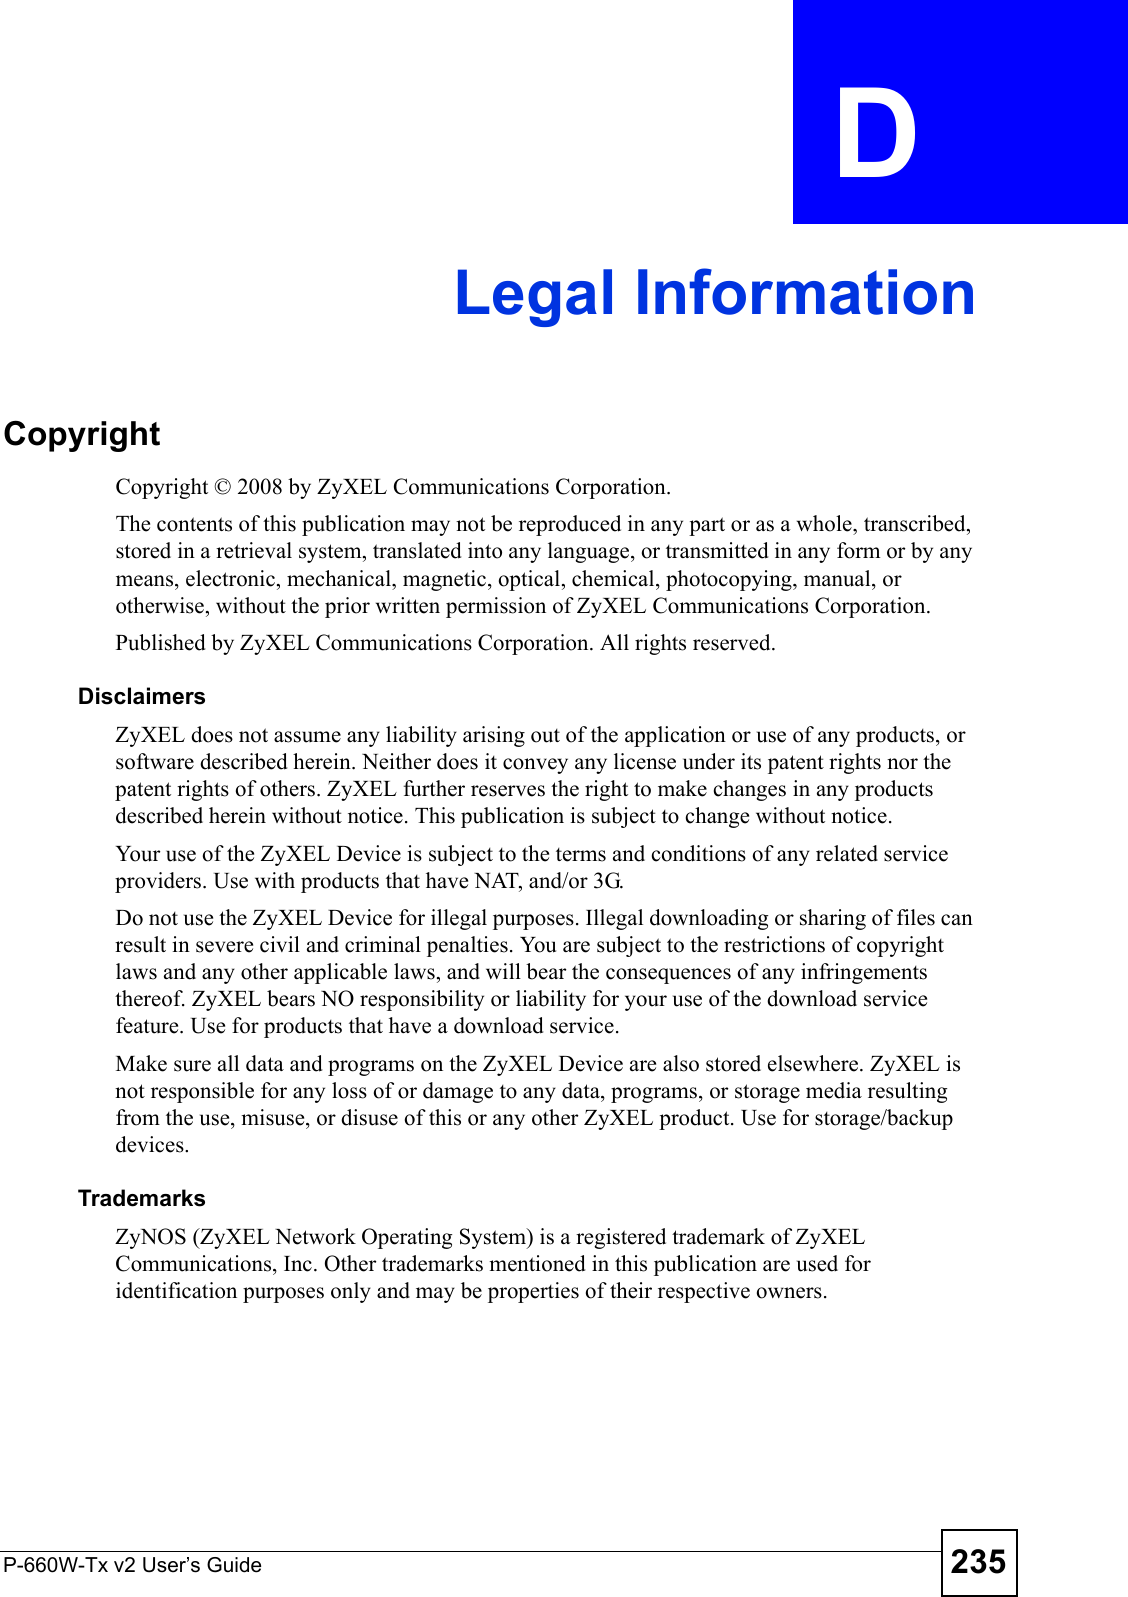 P-660W-Tx v2 User’s Guide 235APPENDIX  D Legal InformationCopyrightCopyright © 2008 by ZyXEL Communications Corporation.The contents of this publication may not be reproduced in any part or as a whole, transcribed, stored in a retrieval system, translated into any language, or transmitted in any form or by any means, electronic, mechanical, magnetic, optical, chemical, photocopying, manual, or otherwise, without the prior written permission of ZyXEL Communications Corporation.Published by ZyXEL Communications Corporation. All rights reserved.DisclaimersZyXEL does not assume any liability arising out of the application or use of any products, or software described herein. Neither does it convey any license under its patent rights nor the patent rights of others. ZyXEL further reserves the right to make changes in any products described herein without notice. This publication is subject to change without notice.Your use of the ZyXEL Device is subject to the terms and conditions of any related service providers. Use with products that have NAT, and/or 3G. Do not use the ZyXEL Device for illegal purposes. Illegal downloading or sharing of files can result in severe civil and criminal penalties. You are subject to the restrictions of copyright laws and any other applicable laws, and will bear the consequences of any infringements thereof. ZyXEL bears NO responsibility or liability for your use of the download service feature. Use for products that have a download service. Make sure all data and programs on the ZyXEL Device are also stored elsewhere. ZyXEL is not responsible for any loss of or damage to any data, programs, or storage media resulting from the use, misuse, or disuse of this or any other ZyXEL product. Use for storage/backup devices. TrademarksZyNOS (ZyXEL Network Operating System) is a registered trademark of ZyXEL Communications, Inc. Other trademarks mentioned in this publication are used for identification purposes only and may be properties of their respective owners.